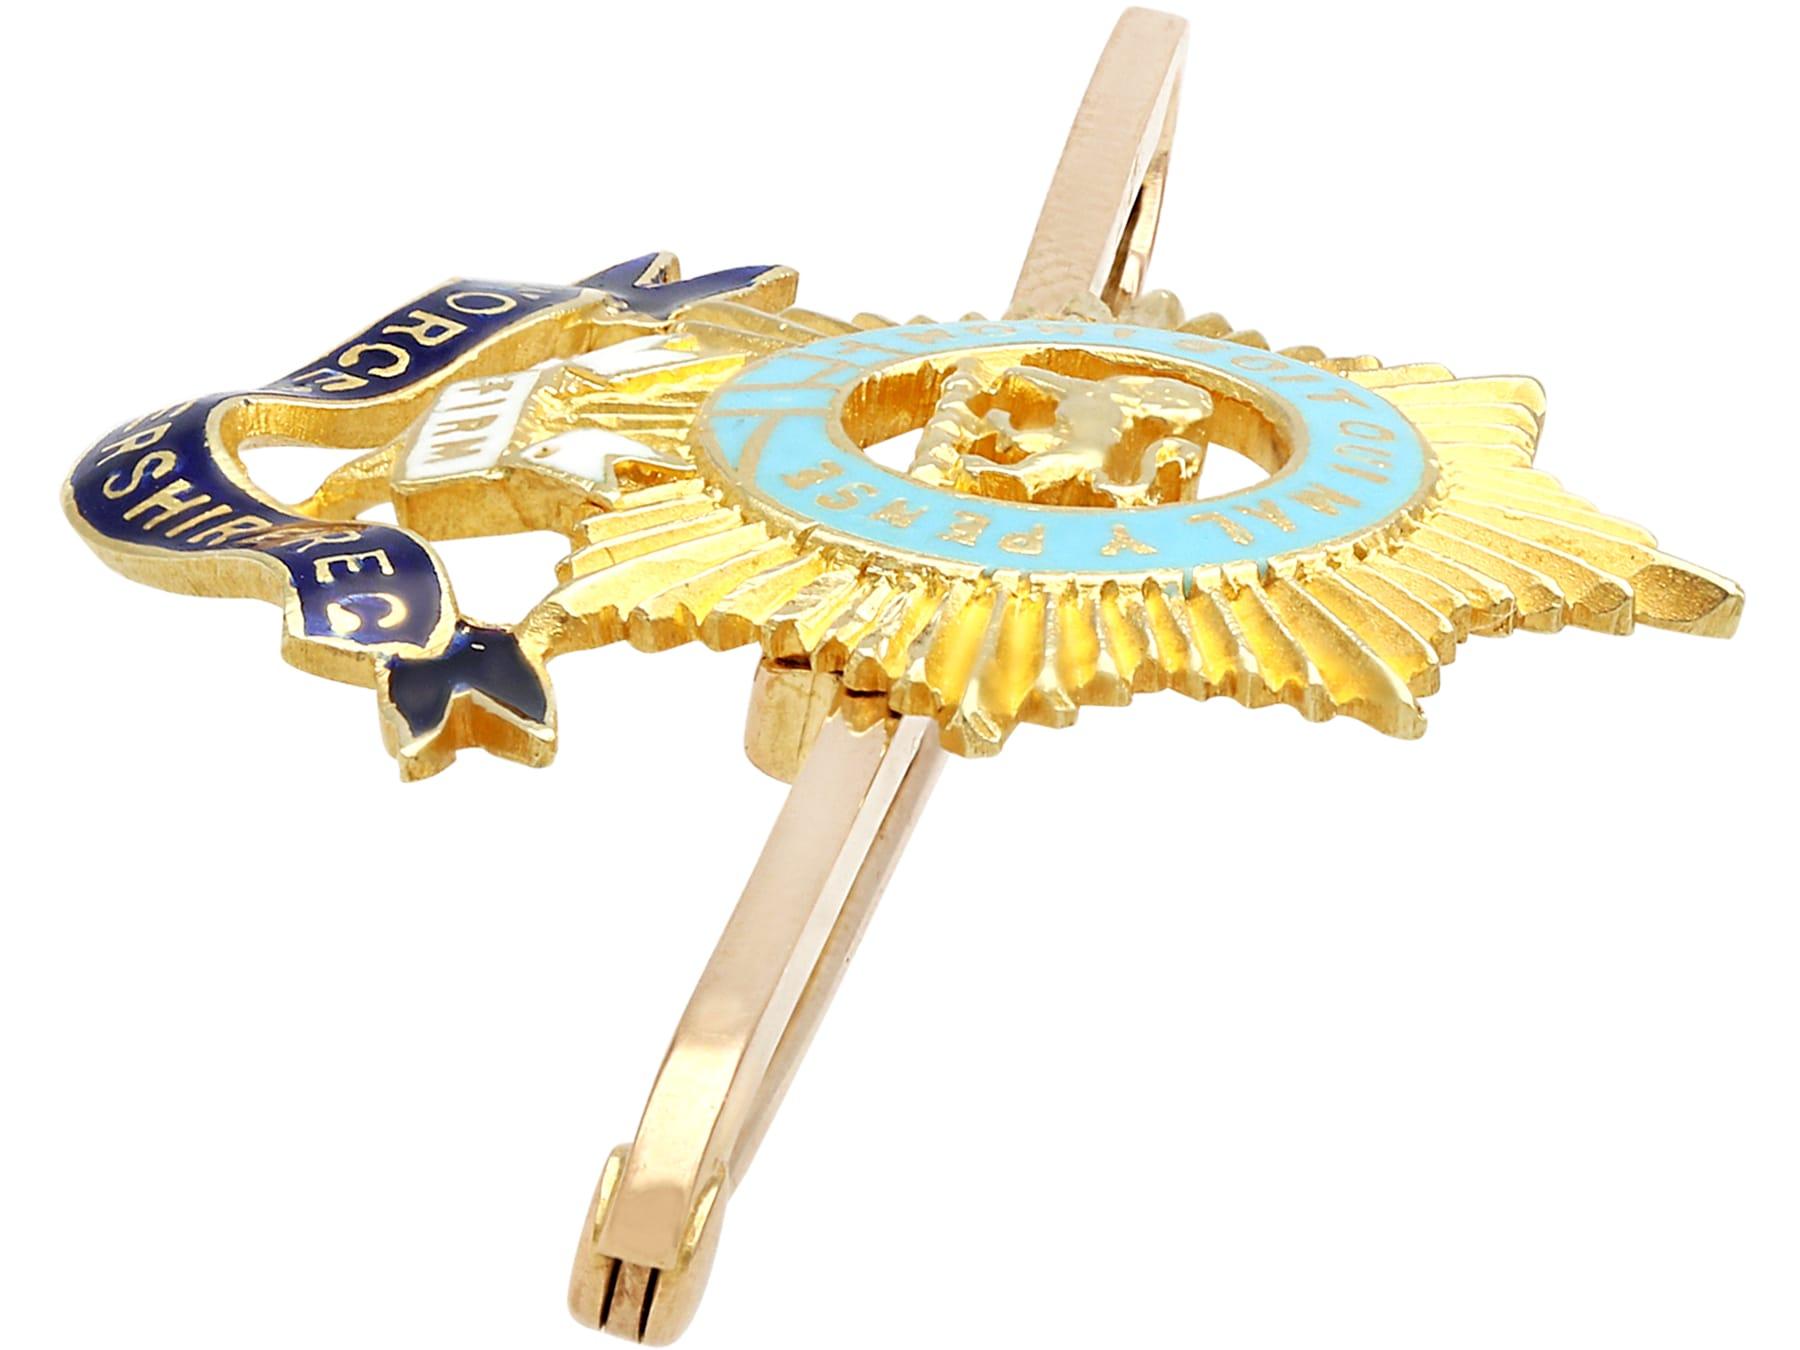 A fine and impressive antique Worcestershire Regiment bar brooch in 15 karat yellow gold and enamel; part of our diverse collection of military related items.

This impressive antique Worcestershire Regiment brooch has been crafted in 15k yellow